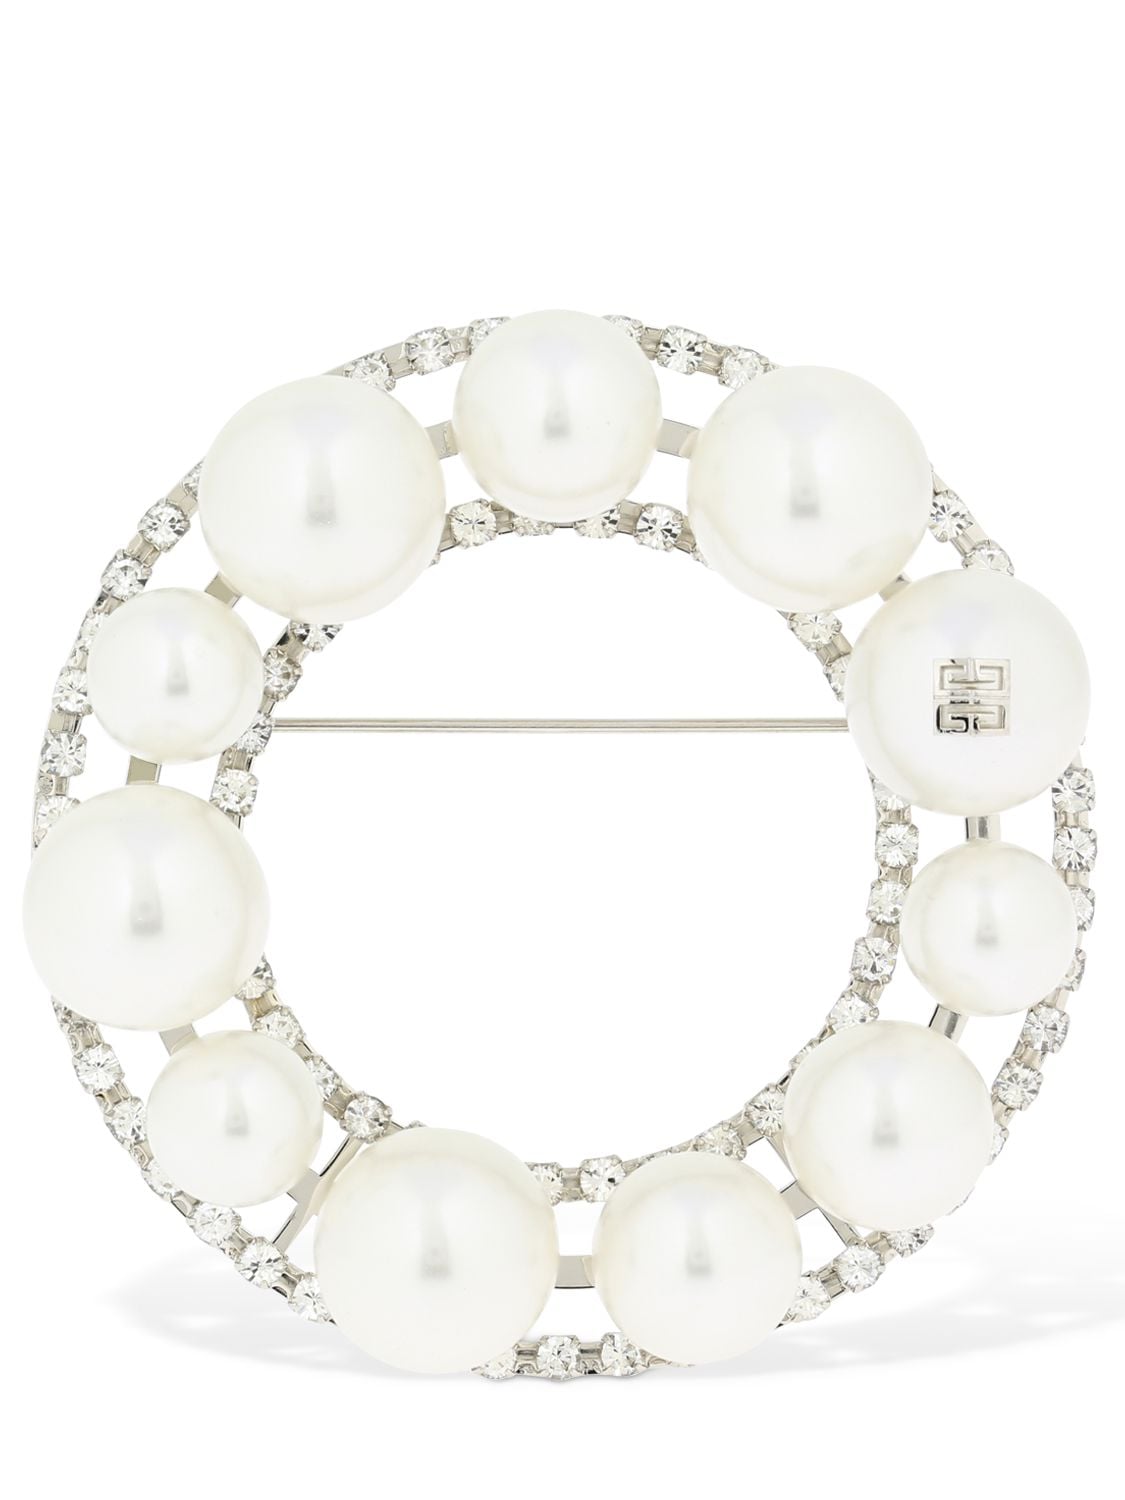 Givenchy Ariana Brooch W/ Imitation Pearls In White,silver | ModeSens